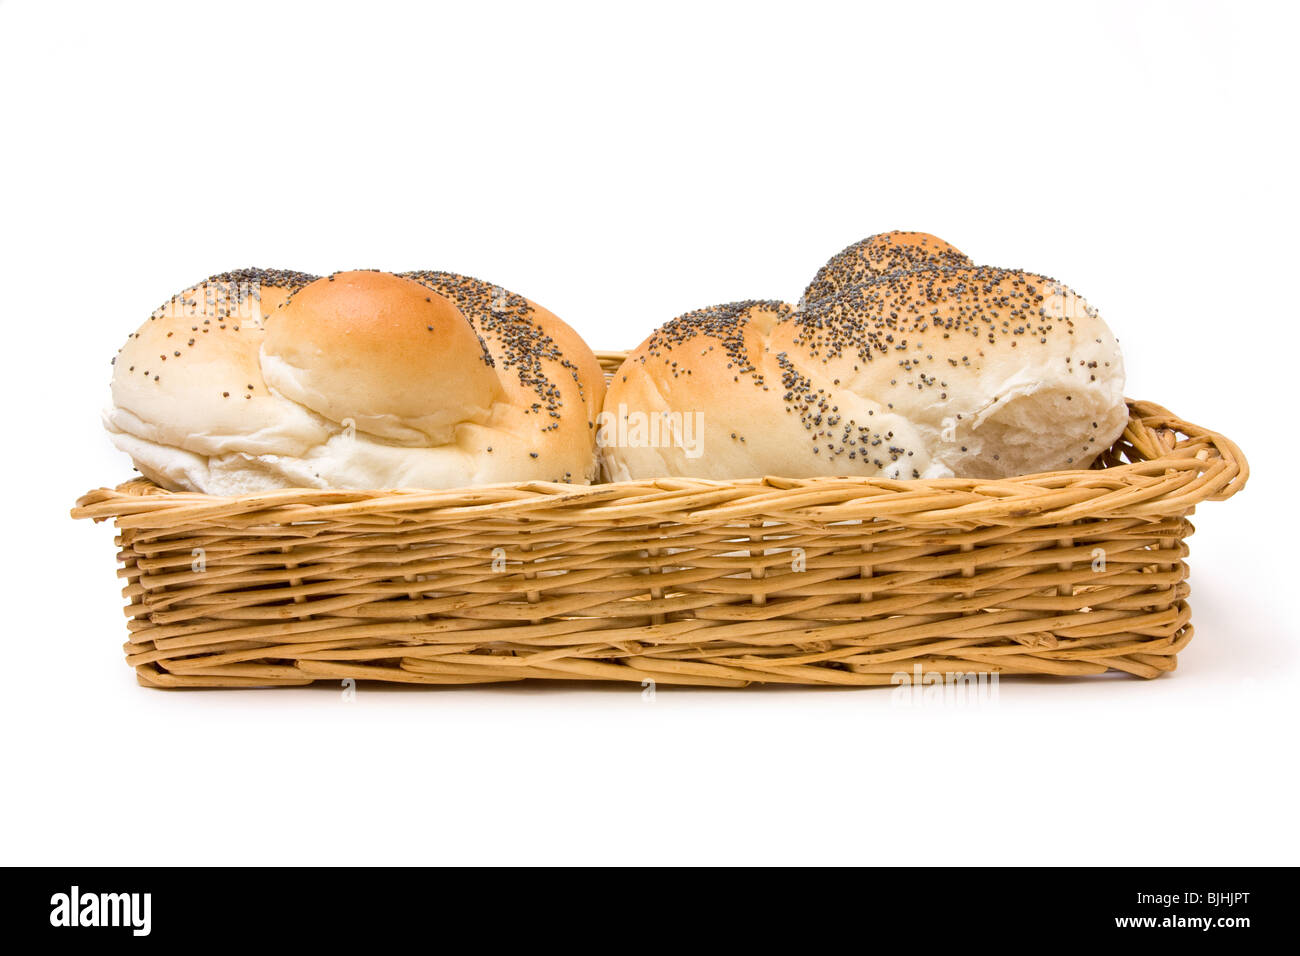 Seeded bread roll in wicker basket from low viewpoint isolated against white background. Stock Photo